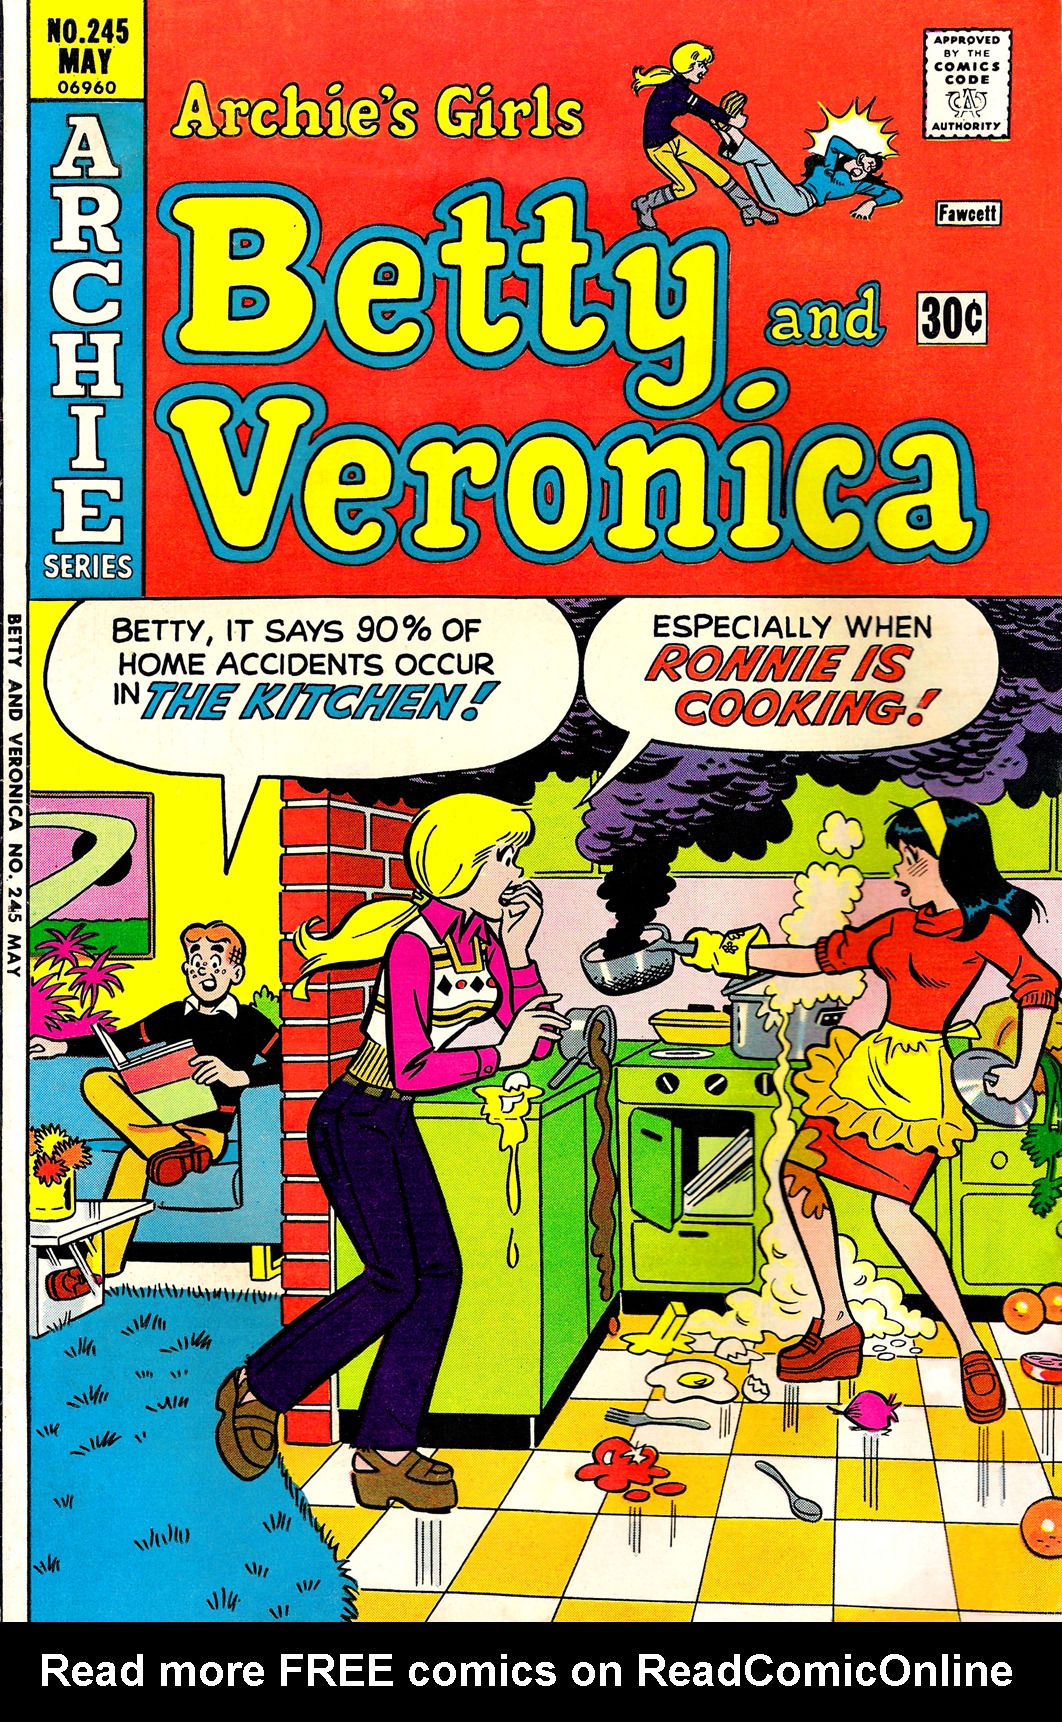 Read online Archie's Girls Betty and Veronica comic -  Issue #245 - 1